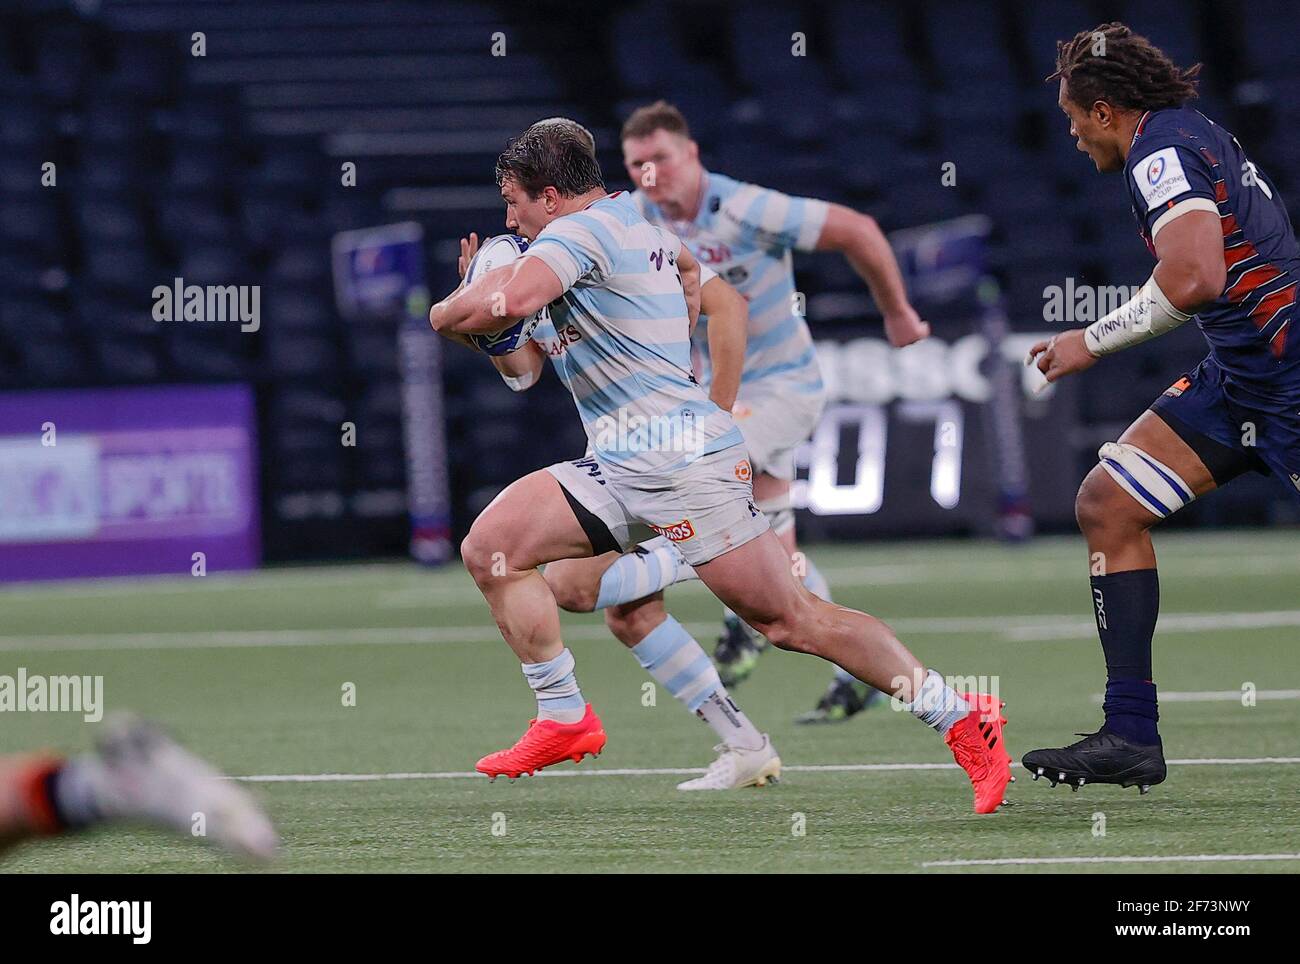 in action during the match between RACING92 and EDIMBOURG Round of 16 of the Champions Cup at Paris La Défense Arena stadium, on April 4 at Nanterre, France. Photo by Loic Baratoux /ABACAPRESS.COM Stock Photo